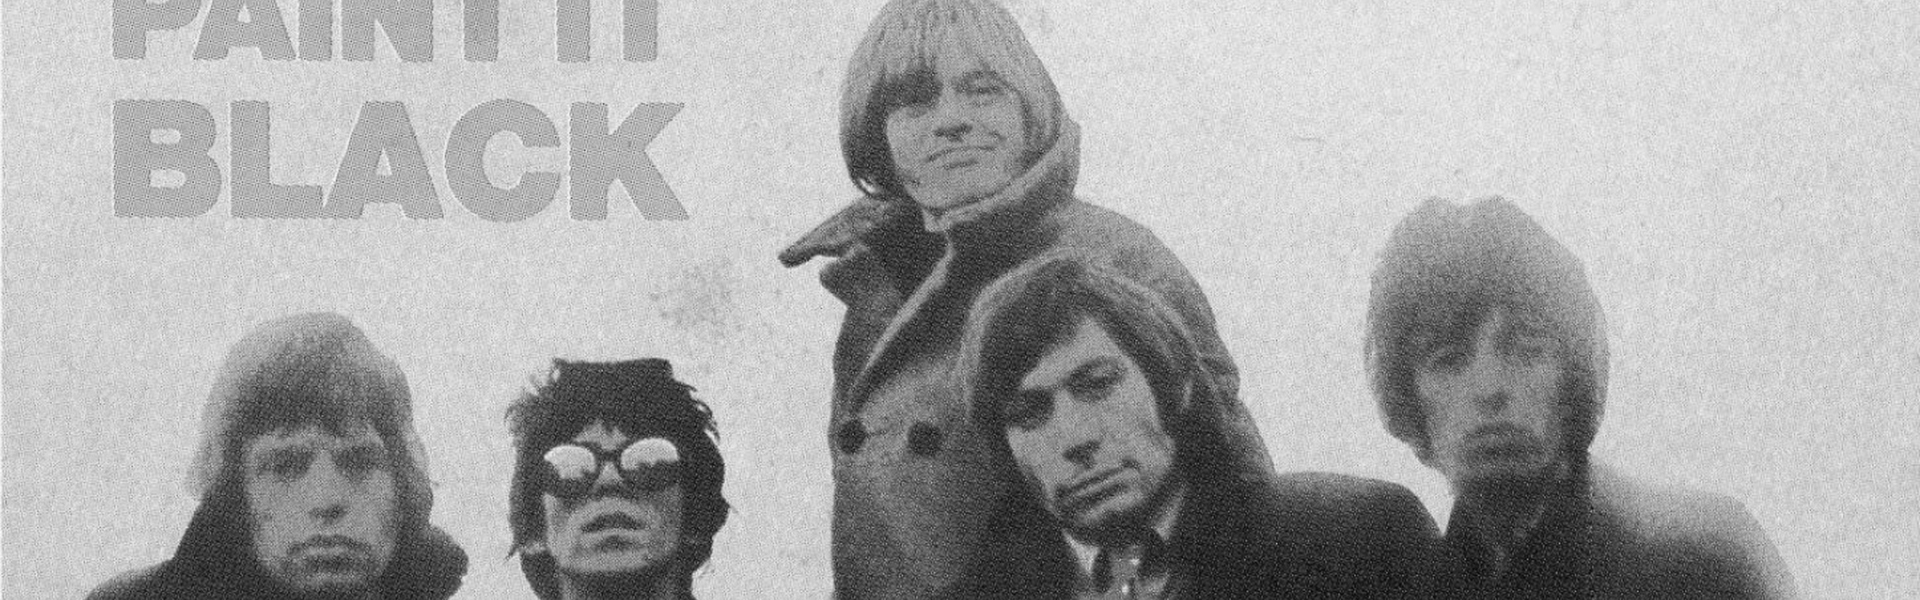 Analysed: The Rolling Stones' Paint it Black - Instrumentality